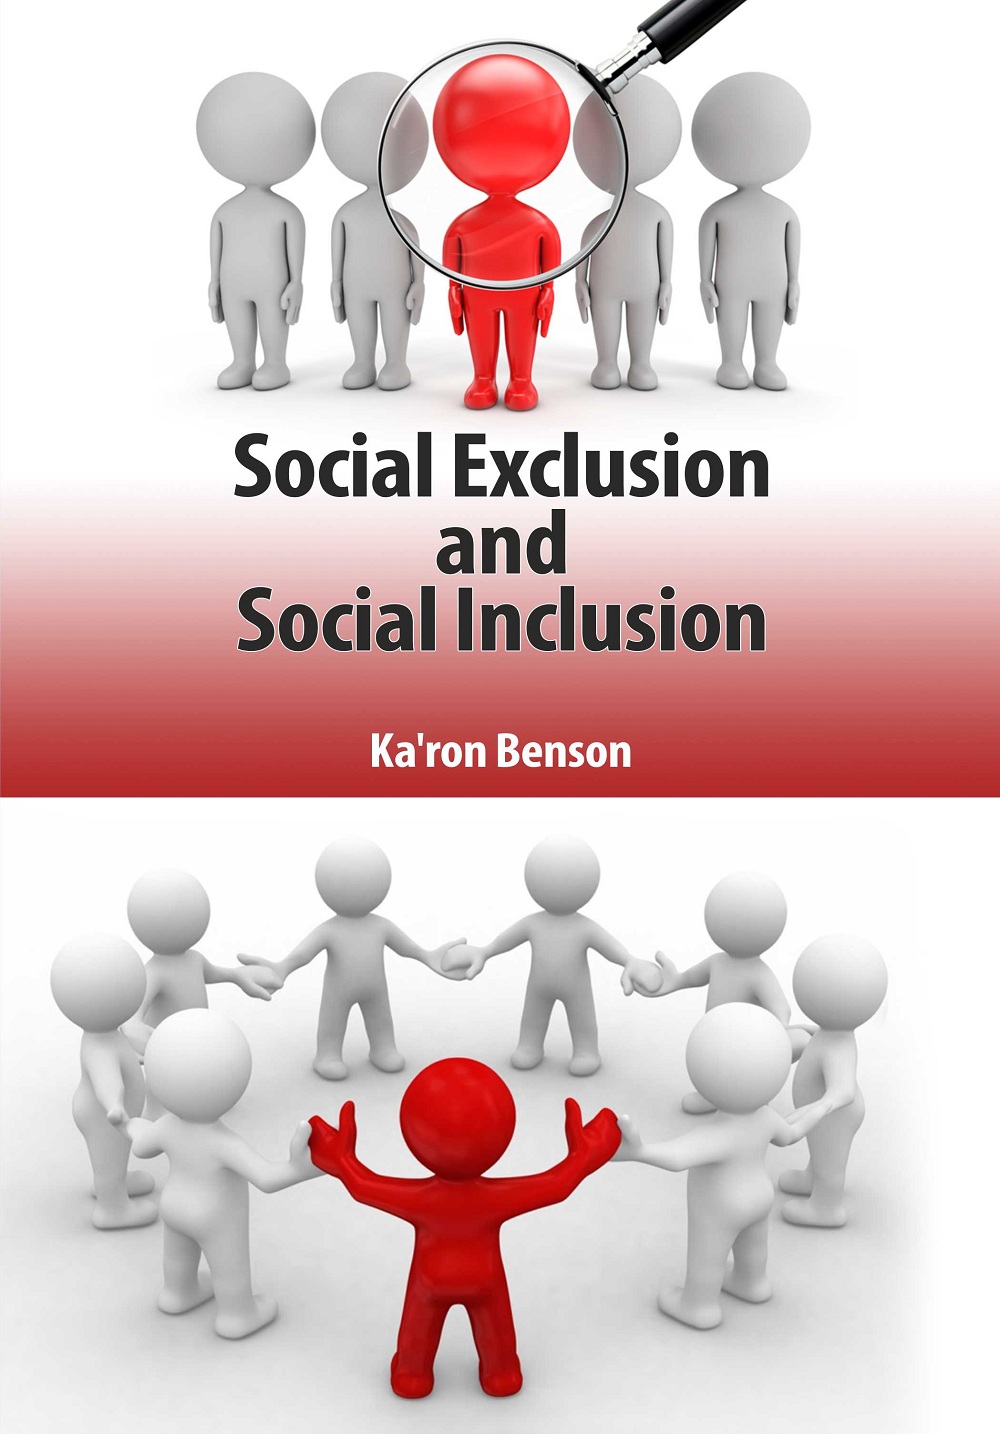 Social Exclusion and Social Inclusion